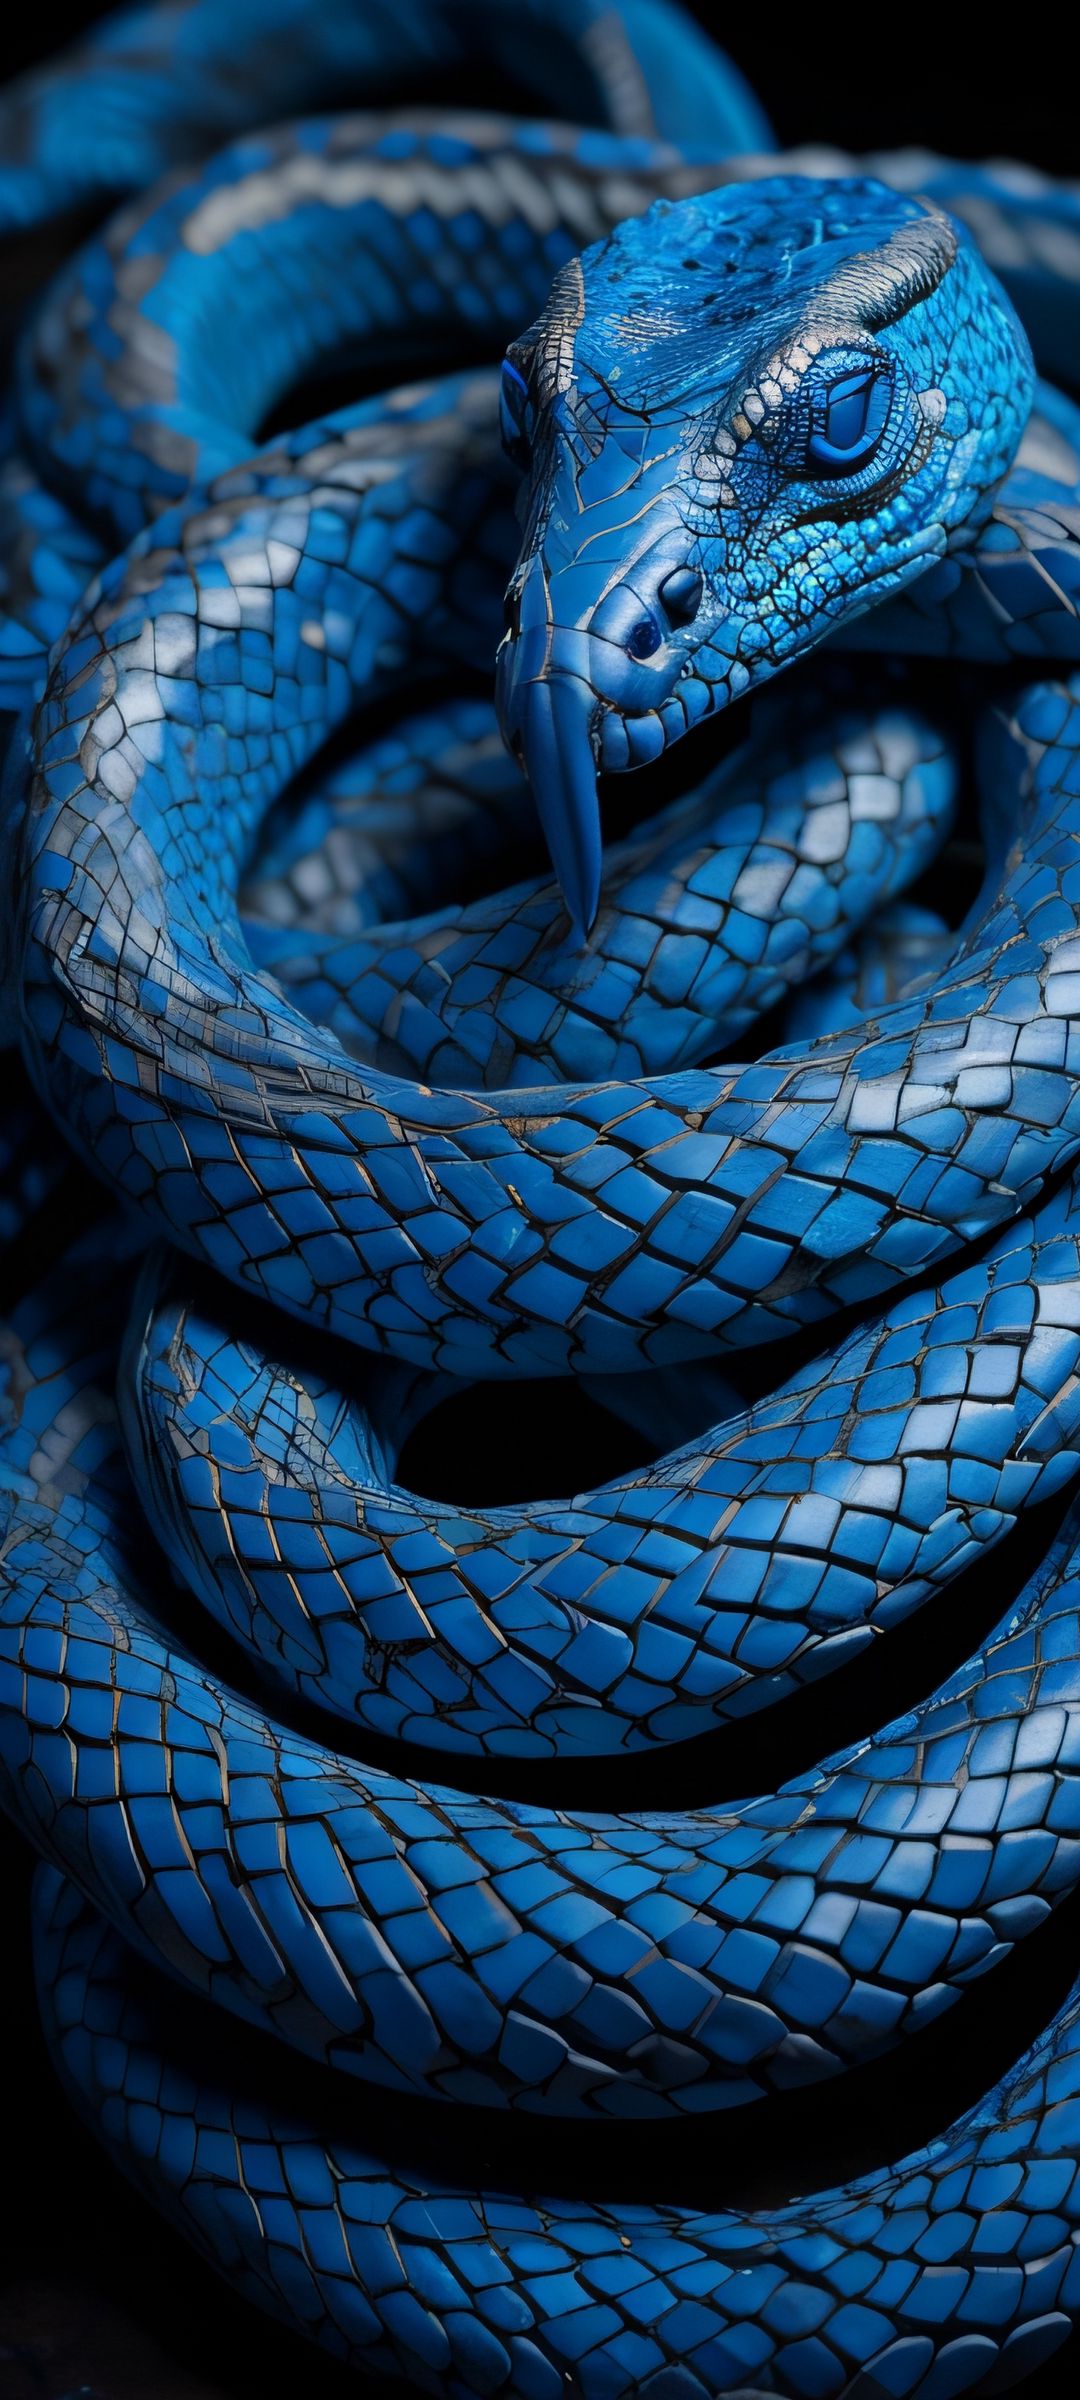 Blue Snake Wallpaper | Buy Online from Happywall